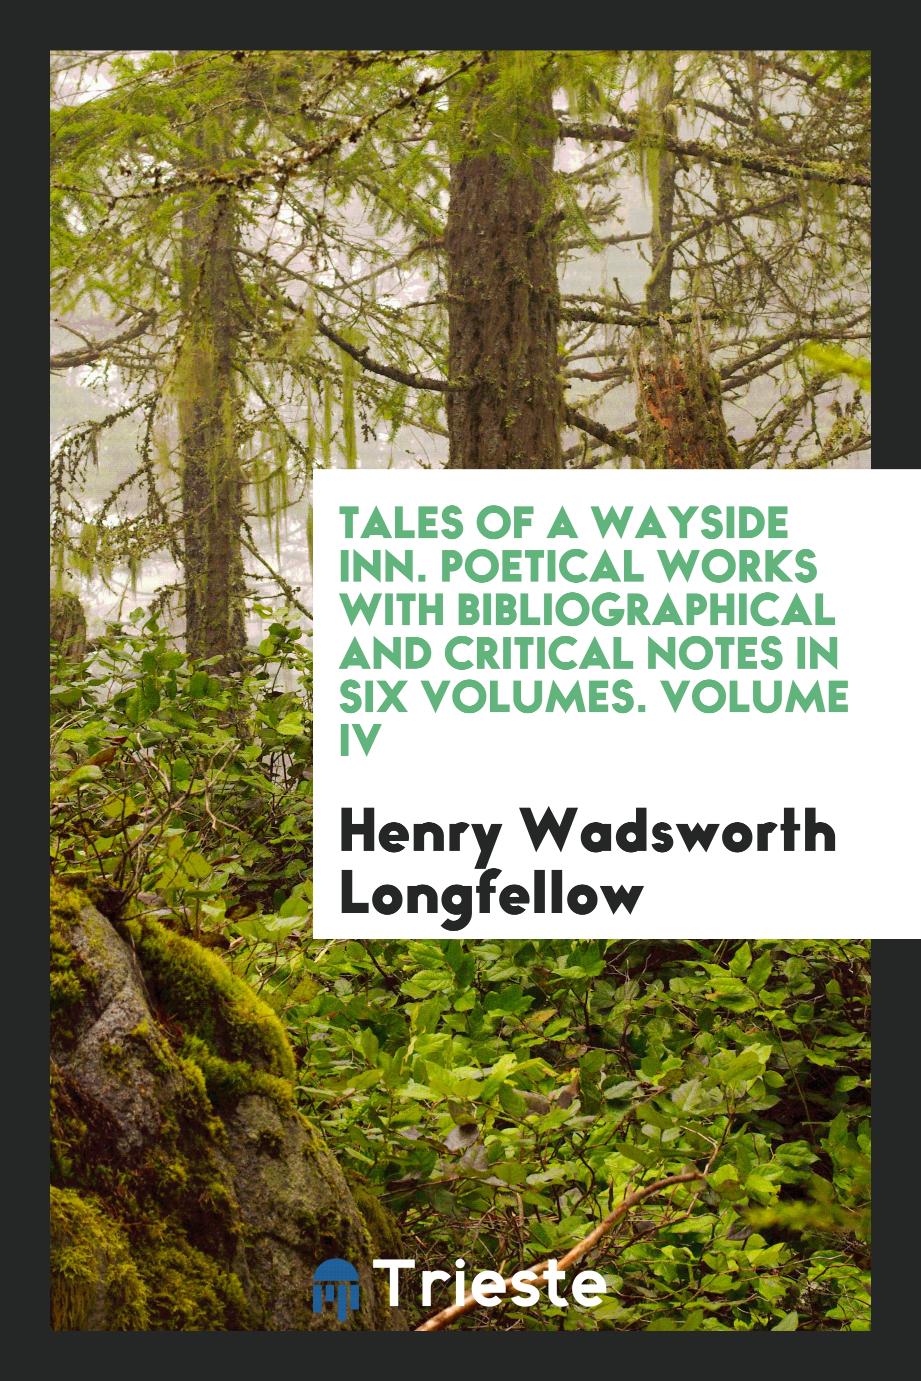 Tales of a Wayside Inn. Poetical works with bibliographical and critical notes in six volumes. Volume IV